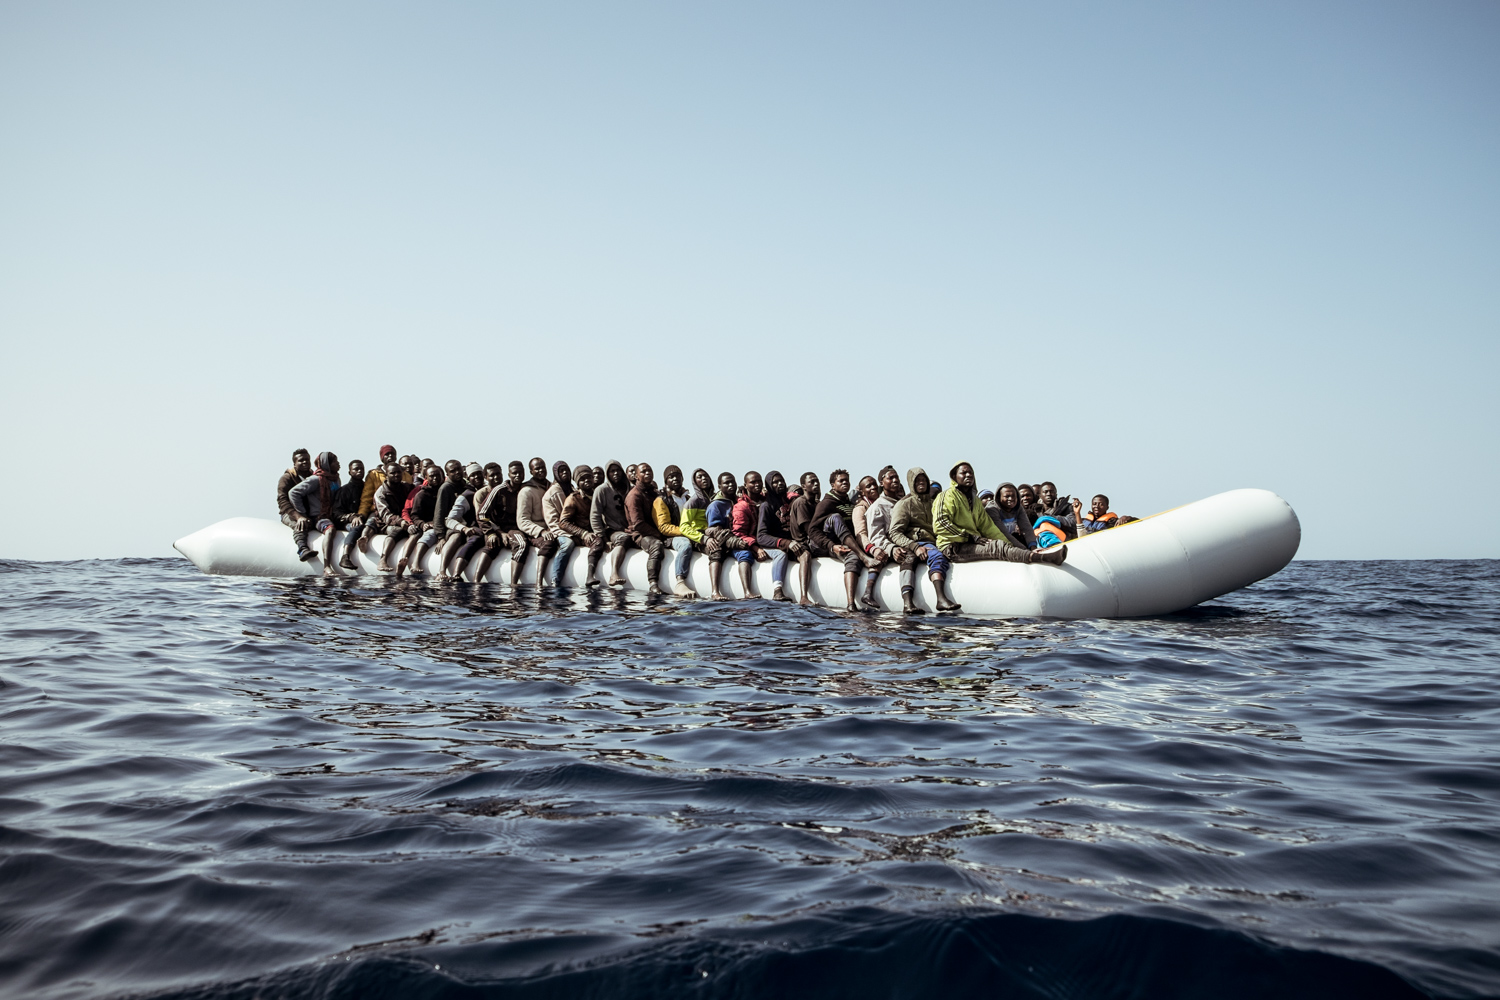 February 22nd 2017, 1PM. A rubber boat in distress overloaded with migrants photographed a few miles off the coast of Libya.